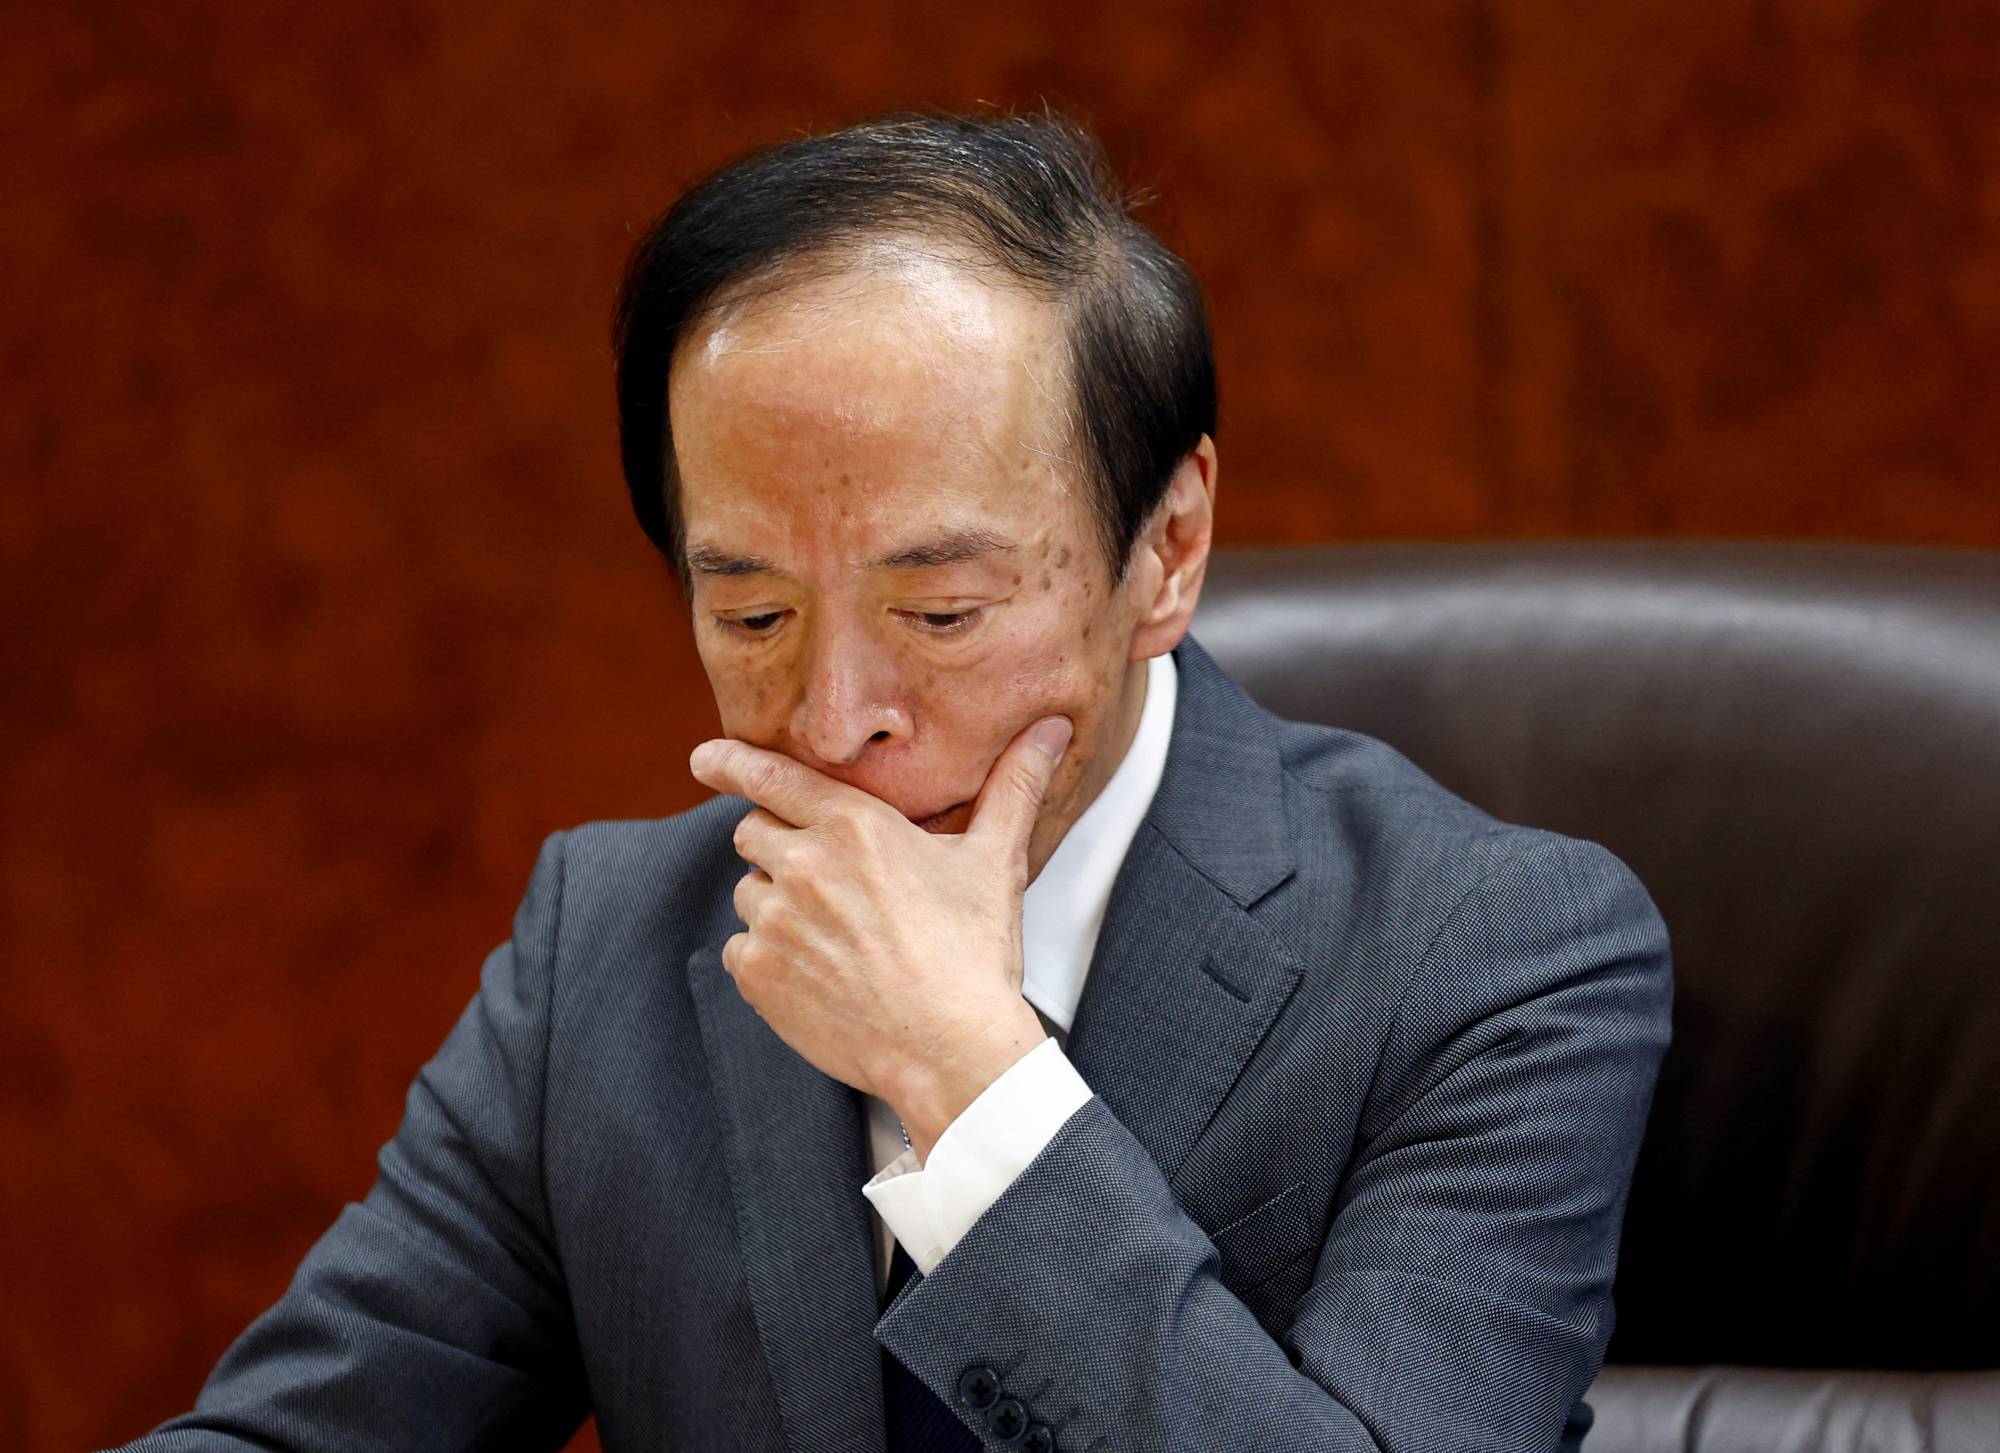 The Bank of Japan had struggled since 2013 to achieve the 2% price stability target. And now that the goal has been reached, the central bank under Gov. Kazuo Ueda has been hesitant to normalize monetary easing. | REUTERS